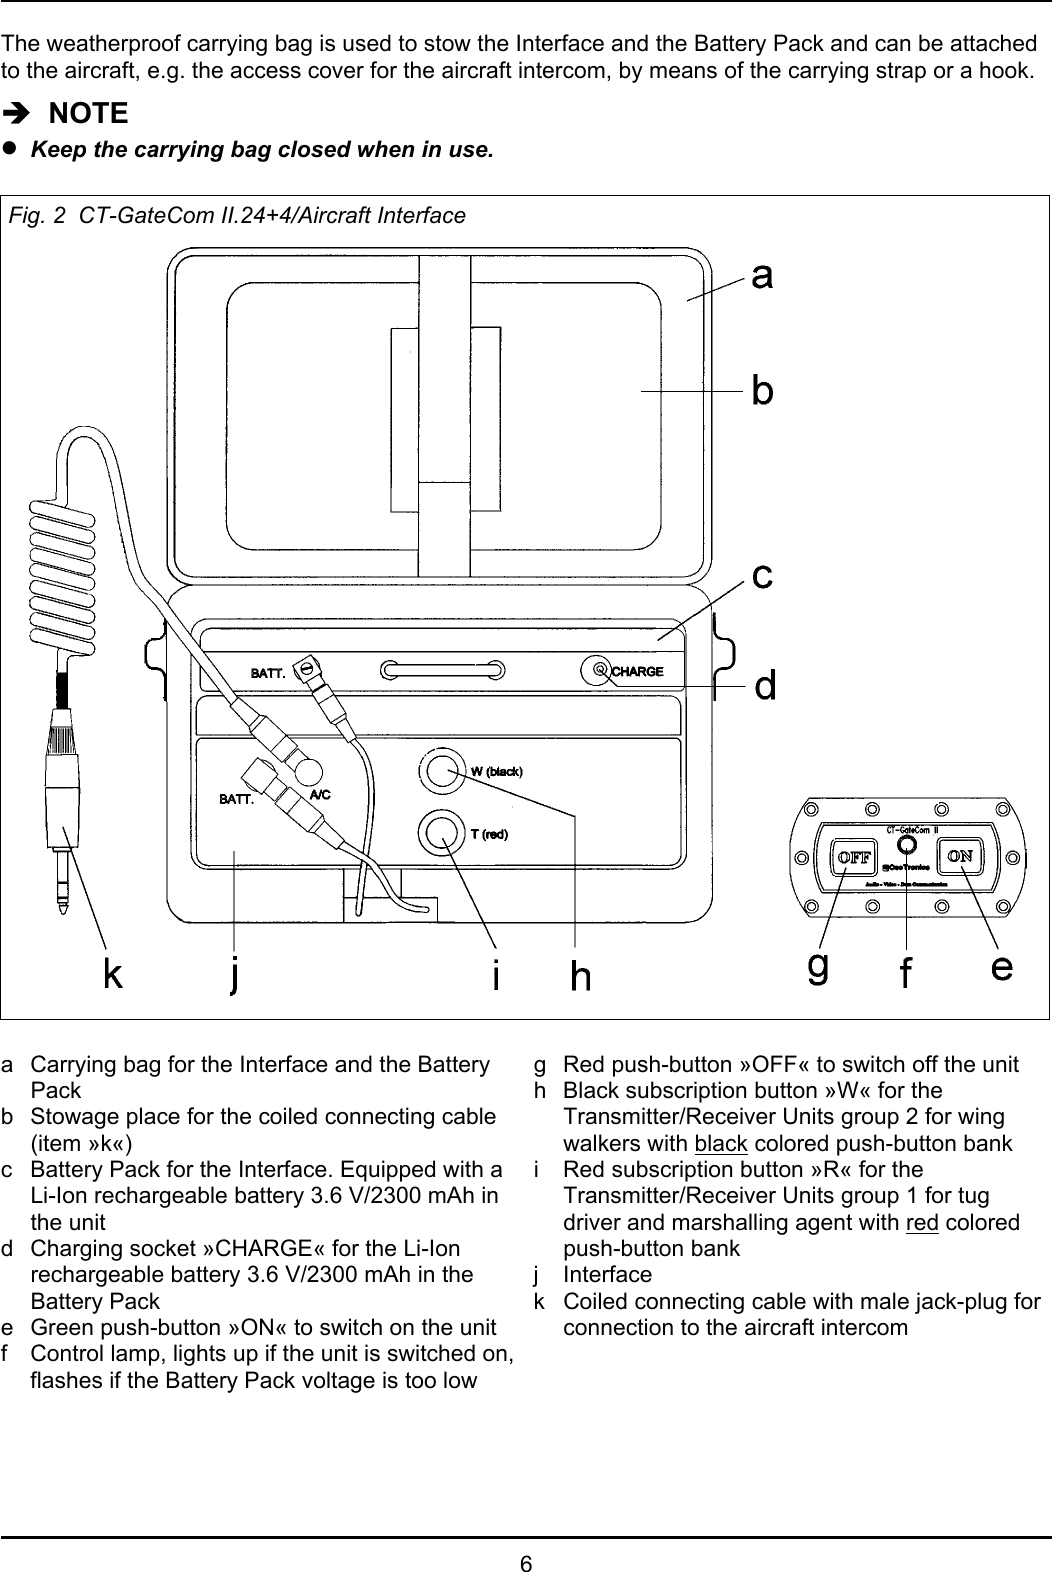 6The weatherproof carrying bag is used to stow the Interface and the Battery Pack and can be attachedto the aircraft, e.g. the access cover for the aircraft intercom, by means of the carrying strap or a hook.Î  NOTEzKeep the carrying bag closed when in use.Fig. 2  CT-GateCom II.24+4/Aircraft Interfacea Carrying bag for the Interface and the BatteryPackb Stowage place for the coiled connecting cable(item »k«)c Battery Pack for the Interface. Equipped with aLi-Ion rechargeable battery 3.6 V/2300 mAh inthe unitd Charging socket »CHARGE« for the Li-Ionrechargeable battery 3.6 V/2300 mAh in theBattery Packe Green push-button »ON« to switch on the unitf Control lamp, lights up if the unit is switched on,flashes if the Battery Pack voltage is too lowg Red push-button »OFF« to switch off the unith Black subscription button »W« for theTransmitter/Receiver Units group 2 for wingwalkers with black colored push-button banki Red subscription button »R« for theTransmitter/Receiver Units group 1 for tugdriver and marshalling agent with red coloredpush-button bankj Interfacek Coiled connecting cable with male jack-plug forconnection to the aircraft intercom